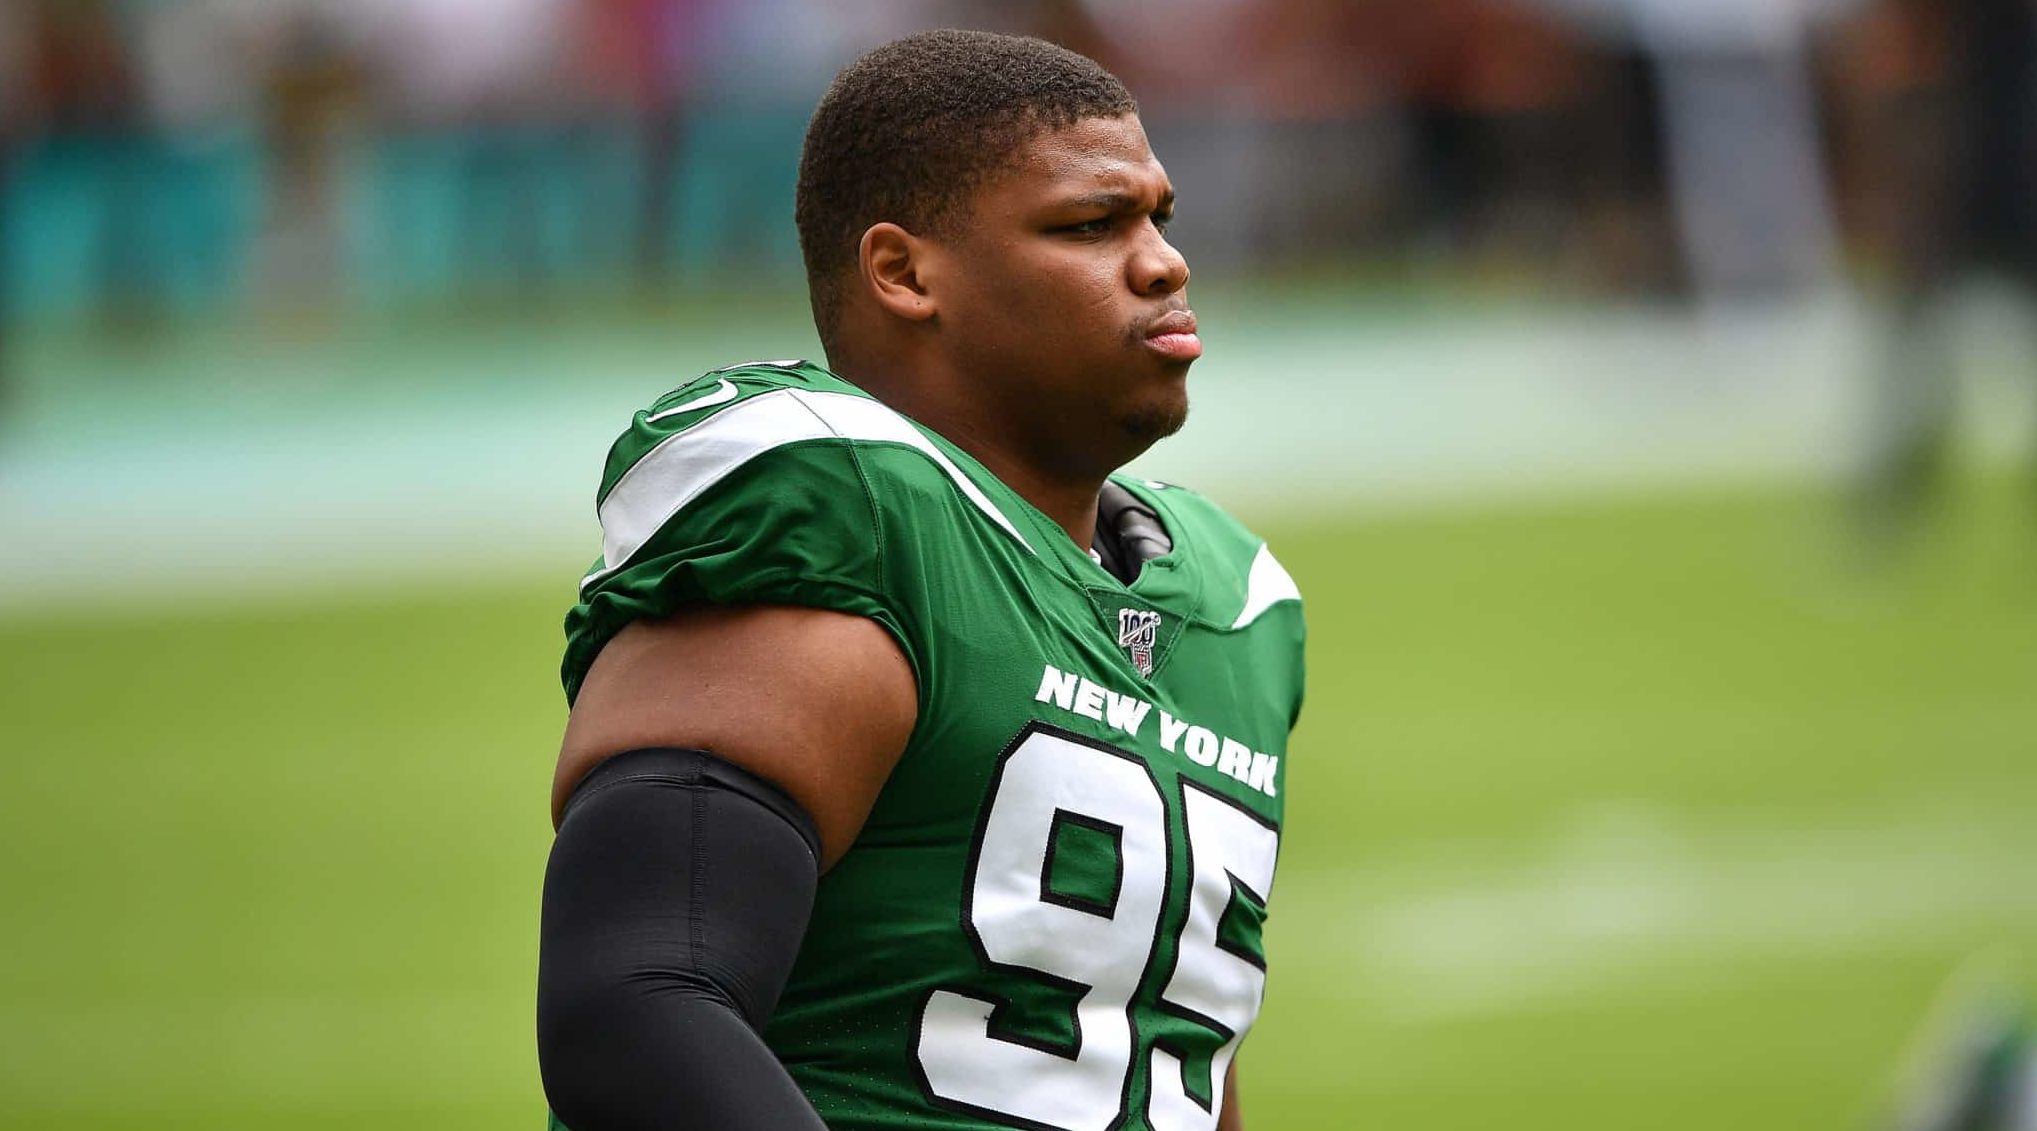 MIAMI, FLORIDA - NOVEMBER 03: Quinnen Williams #95 of the New York Jets warms up prior to the game against the Miami Dolphins at Hard Rock Stadium on November 03, 2019 in Miami, Florida.